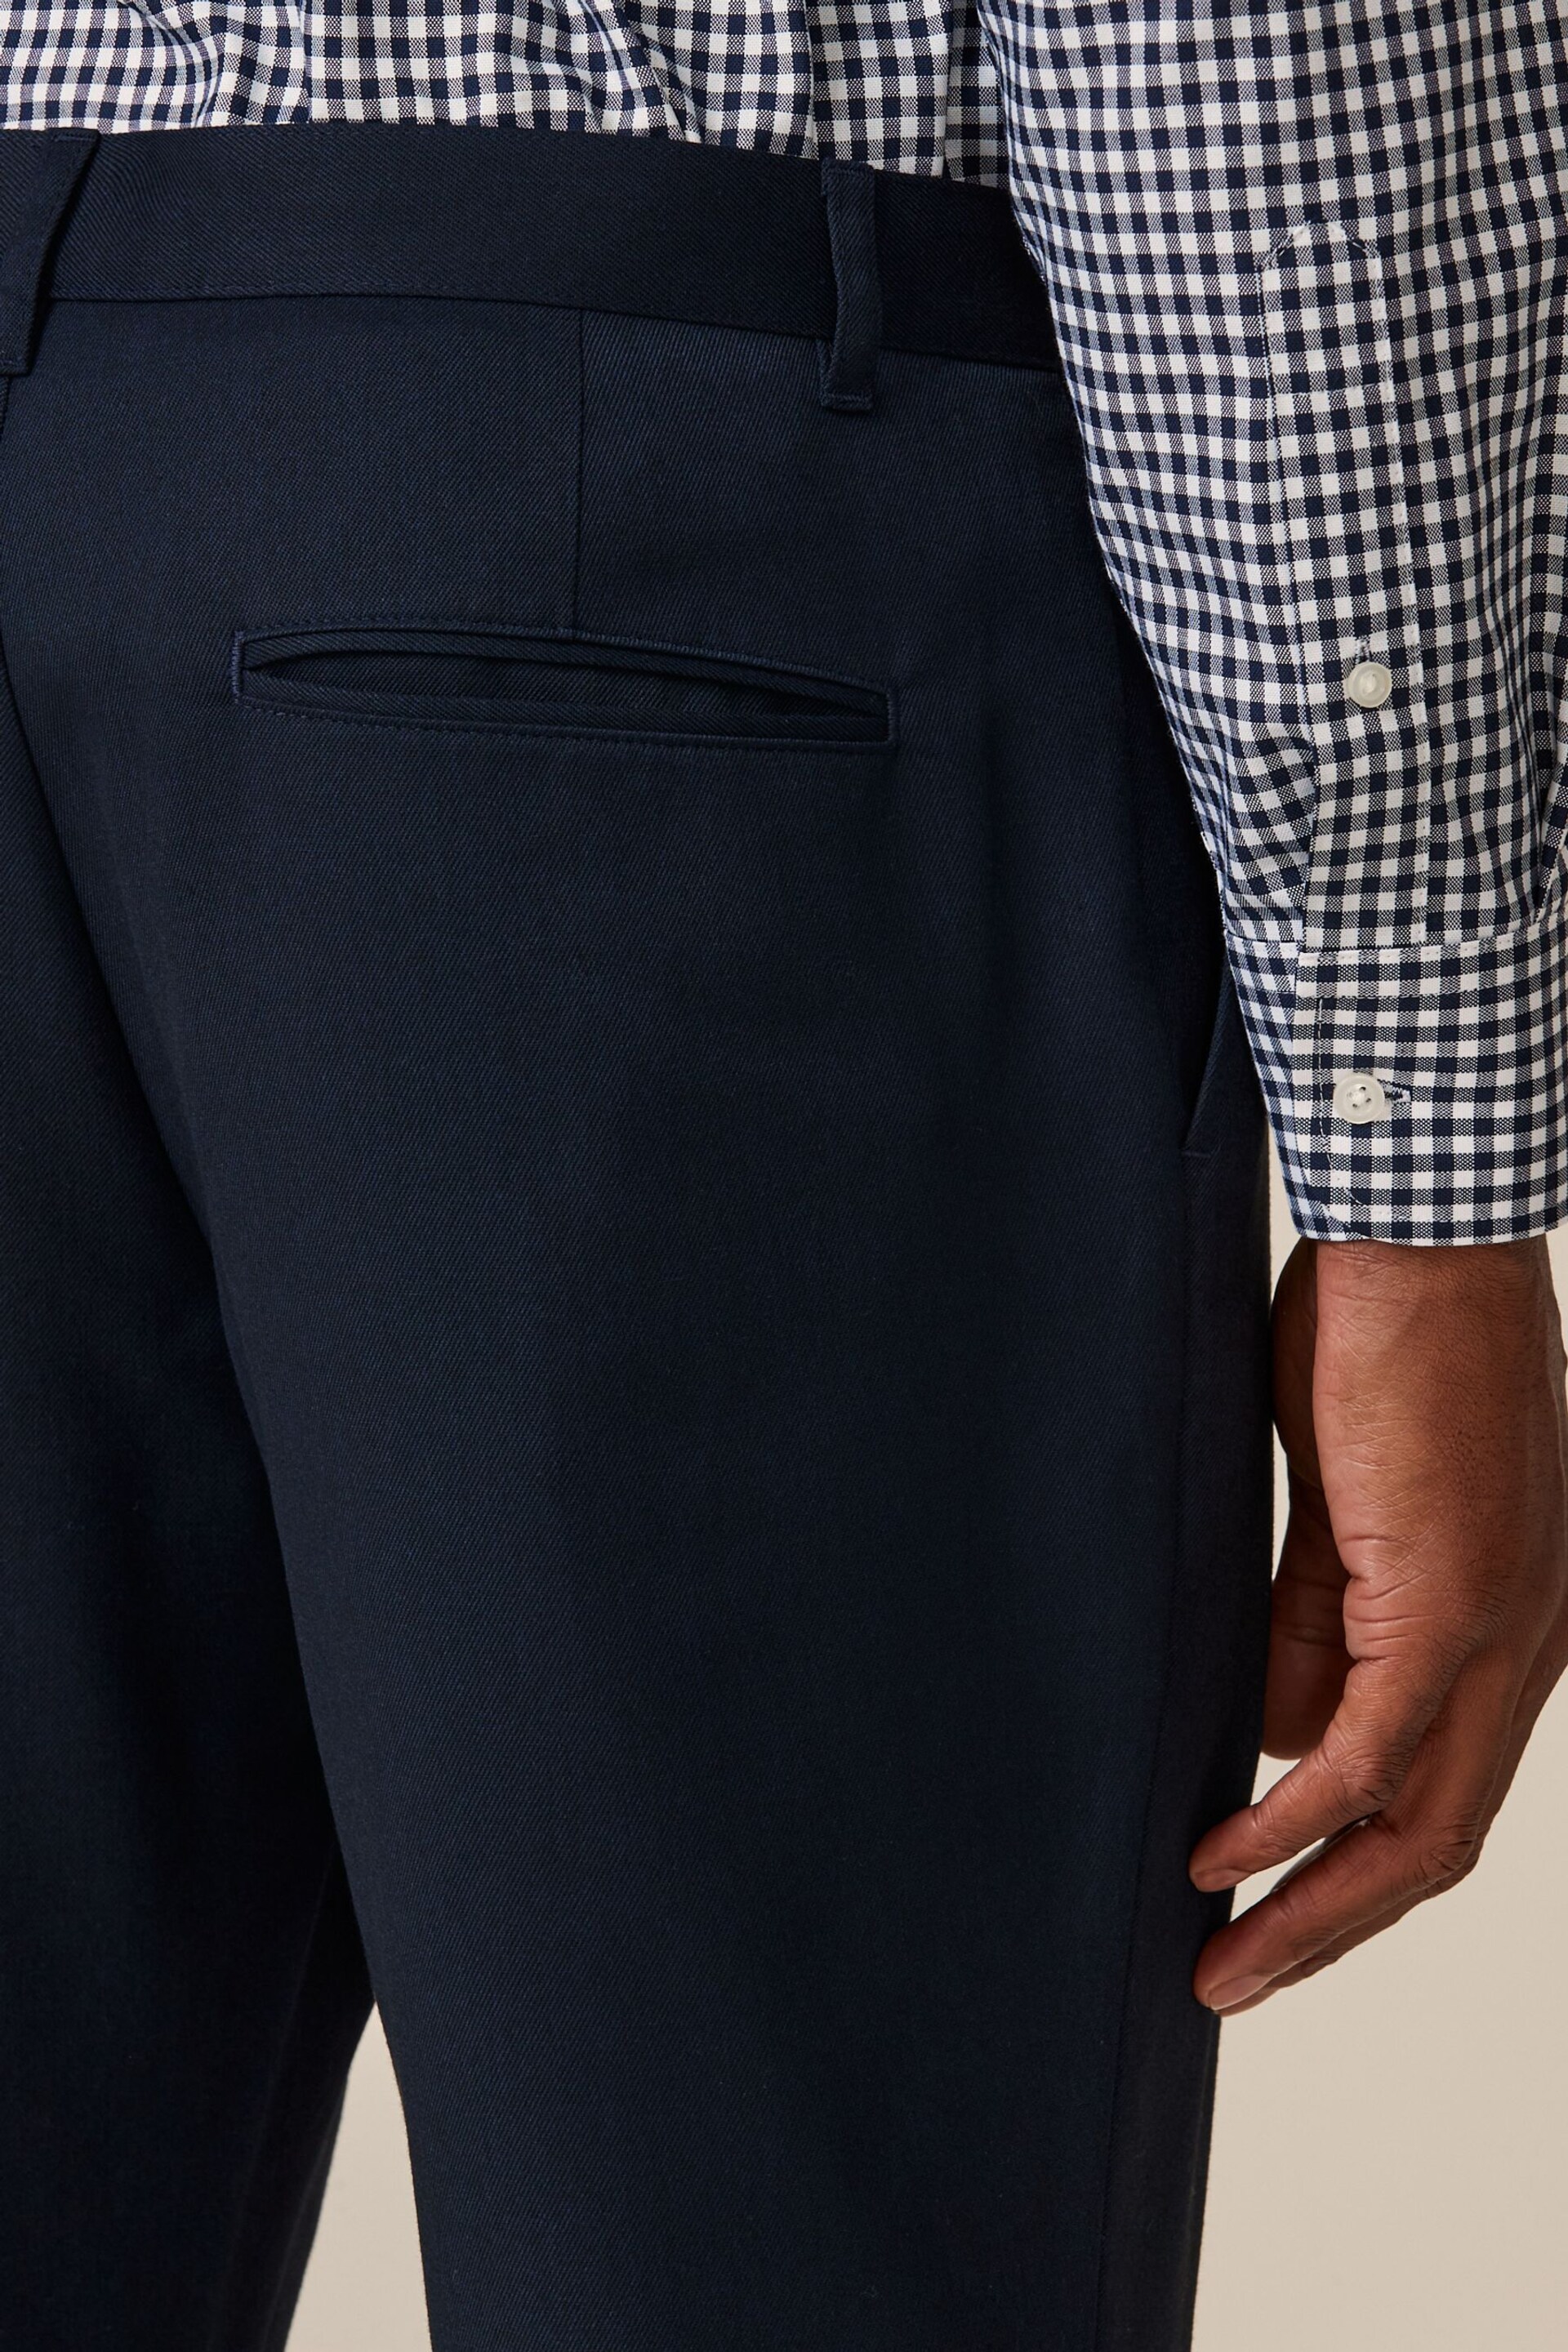 Navy Slim Plain Front Smart Trousers - Image 6 of 9